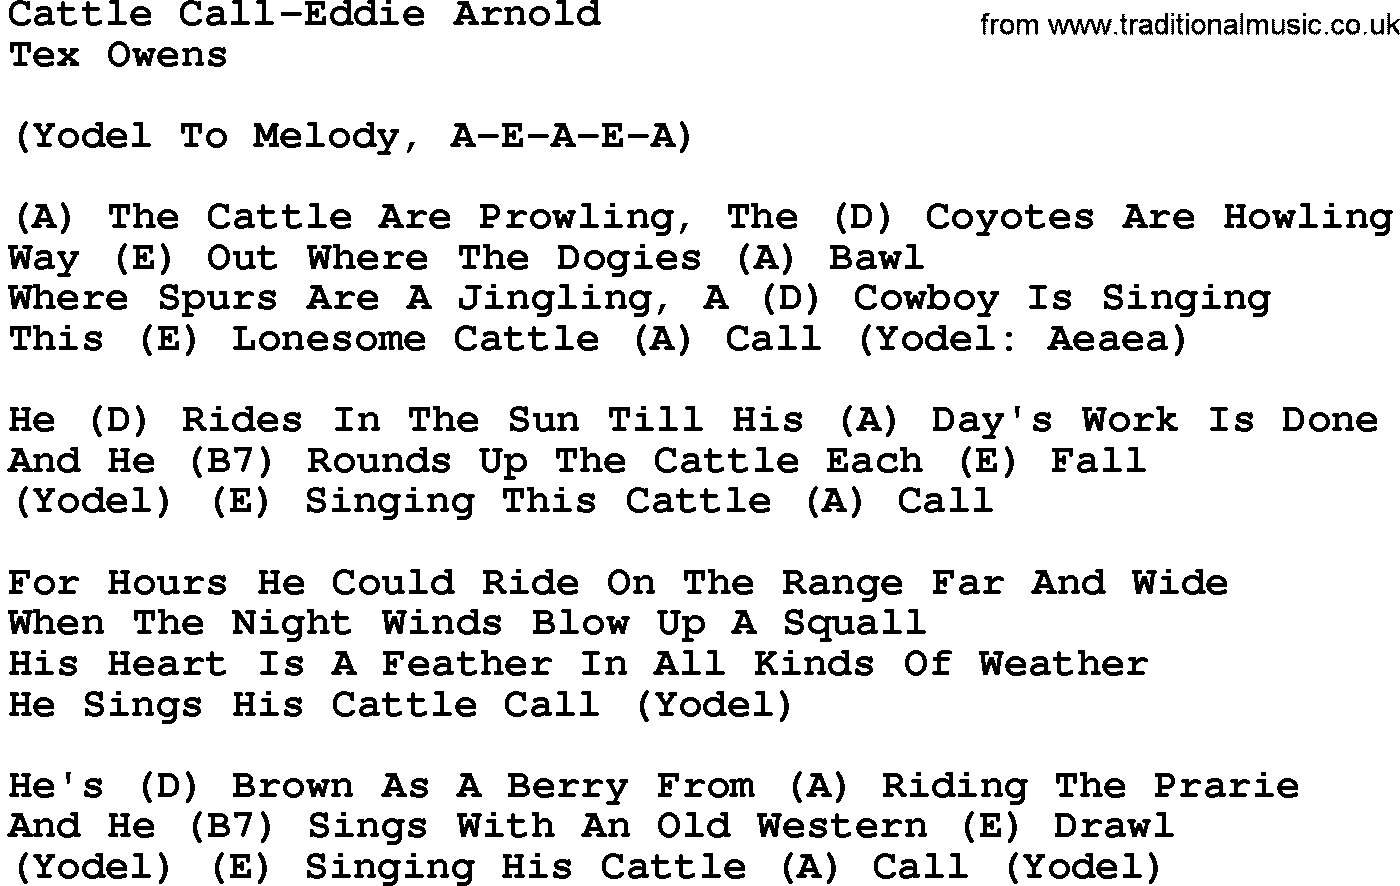 Country music song: Cattle Call-Eddie Arnold lyrics and chords